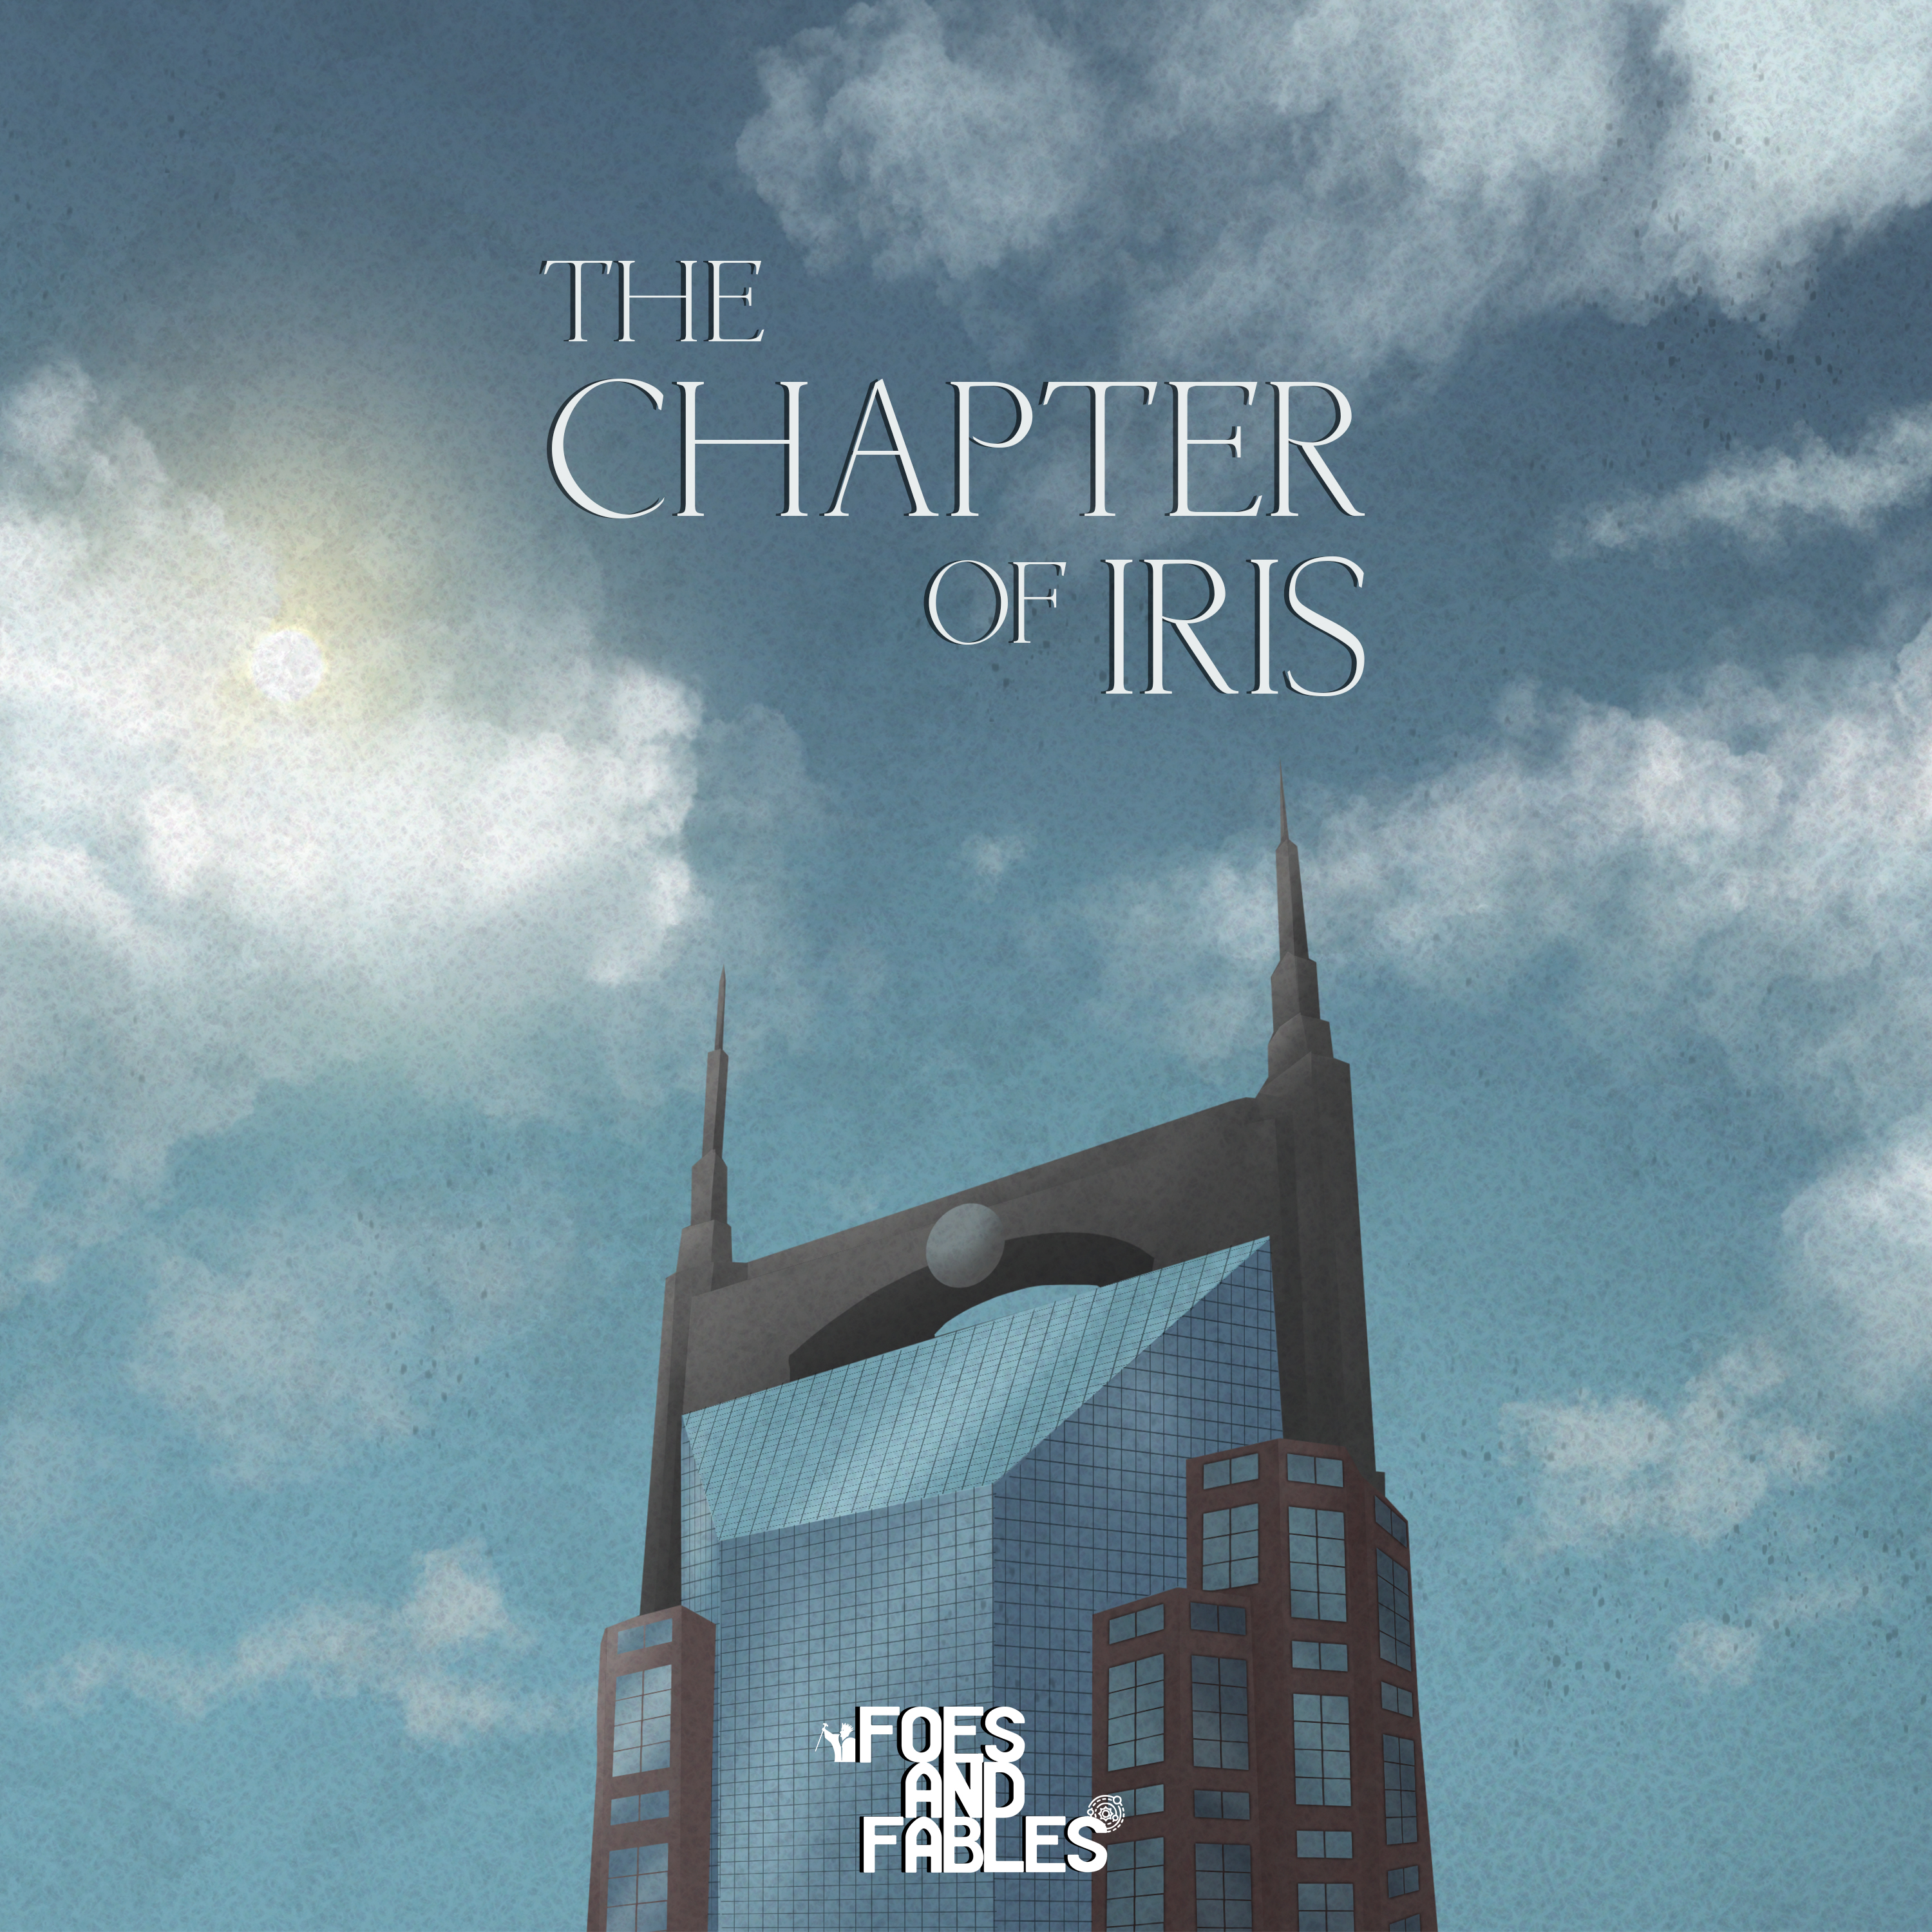 15. The Lightning Stone | The Chapter of Iris